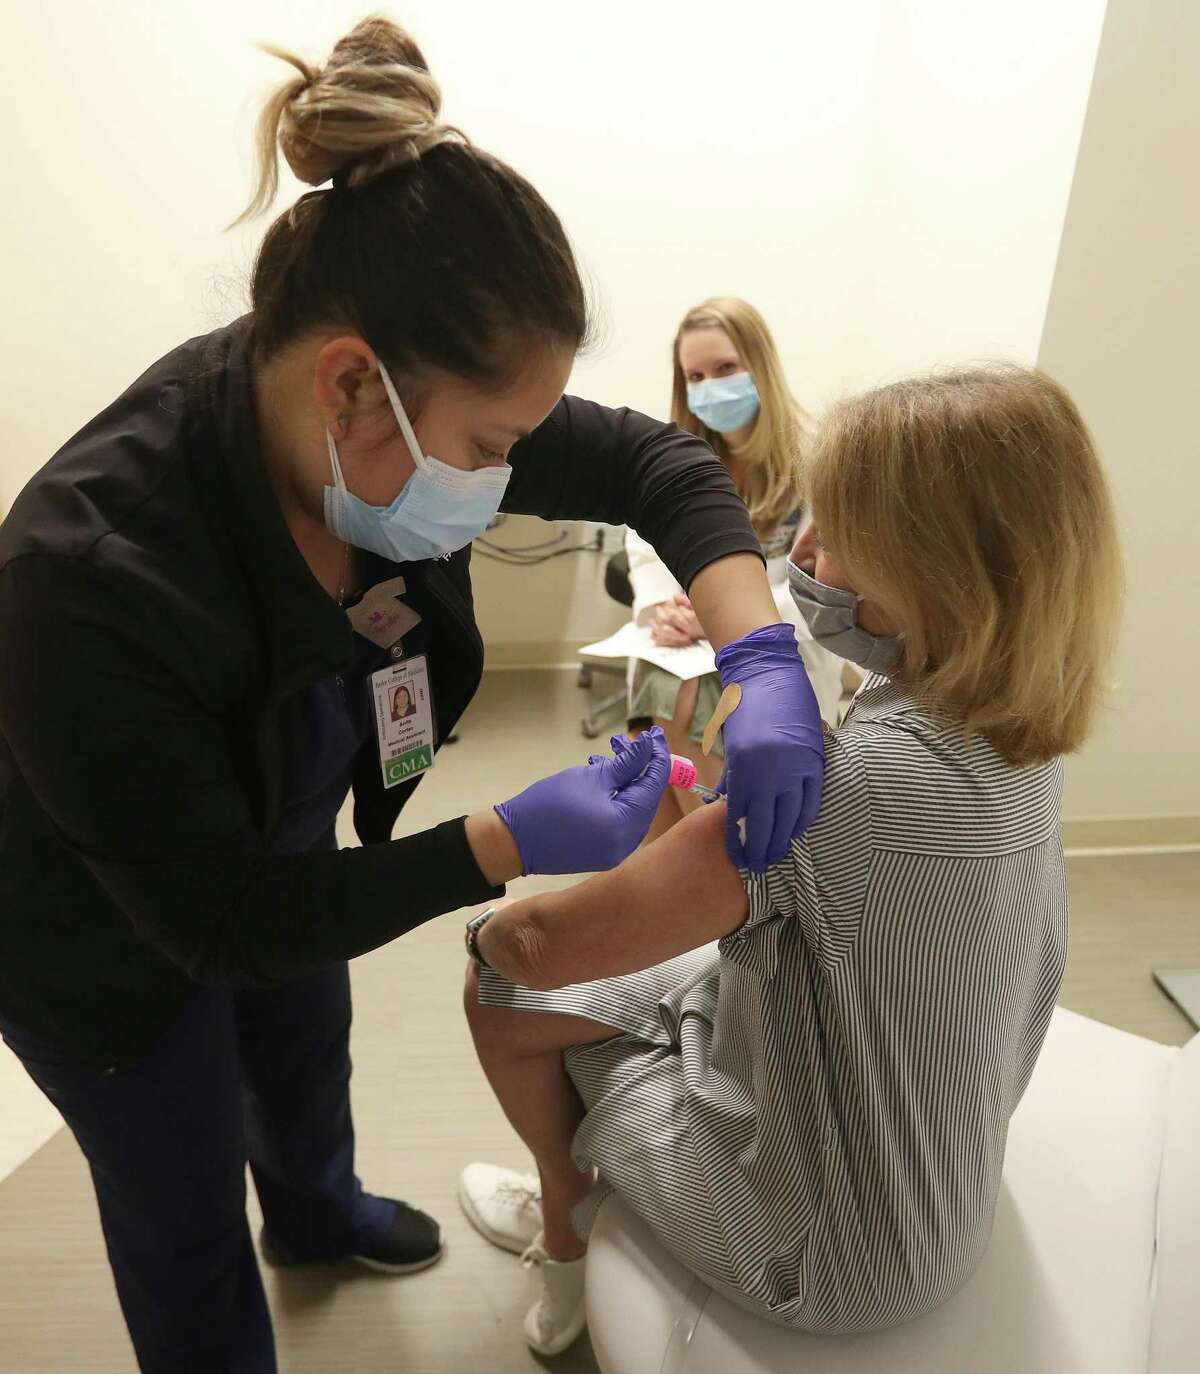 Anita Cortez, CMA, gives RN Liz Bernica her third dose of the Pfizer vaccine, as a booster, while her daughter-in-law, Dr. Jessica Bernica watched at Baylor College of Medicine, Friday, September 24, 2021, in Houston, after the CDC gave boosters the go ahead last night.